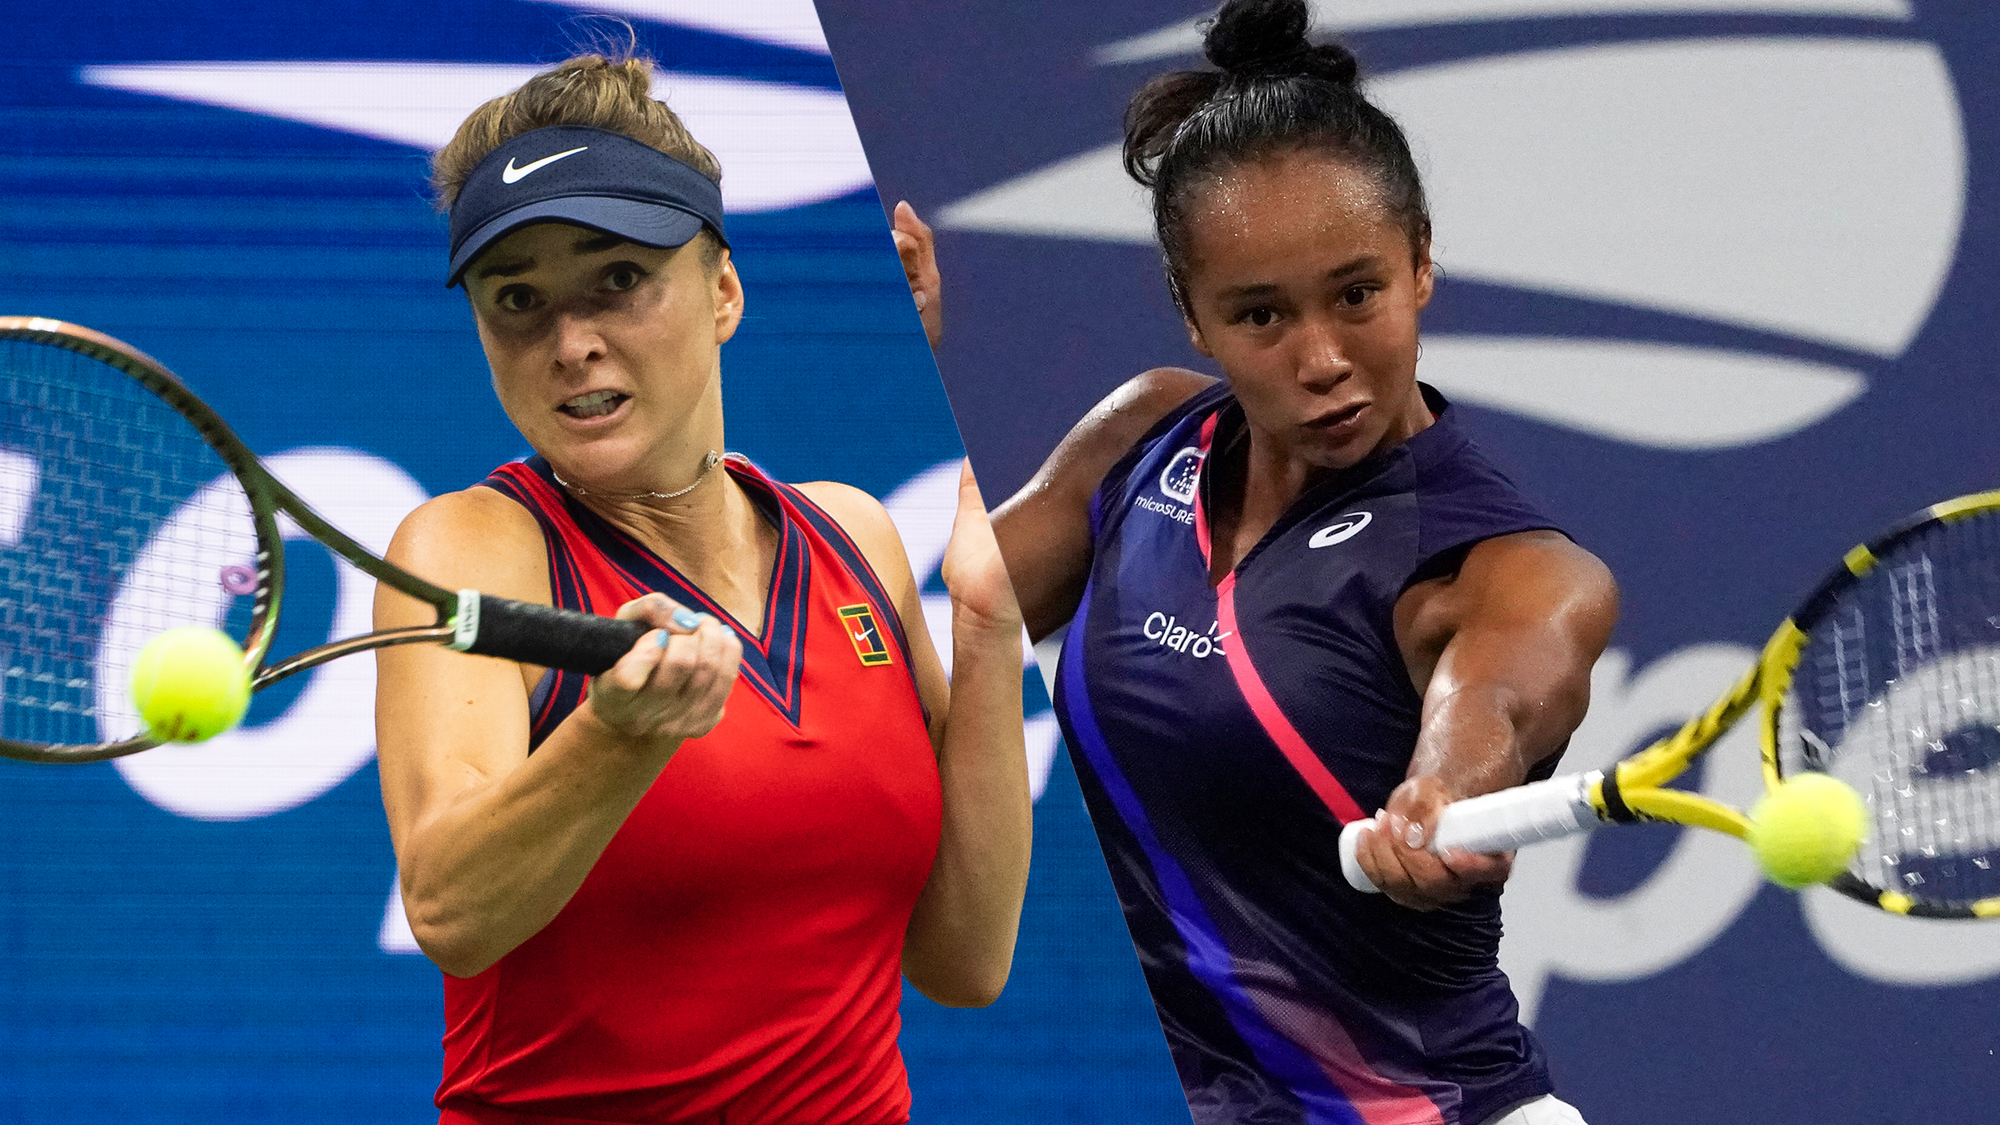 Elina Svitolina vs Leylah Annie Fernandez live stream and how to watch US Open tennis online Toms Guide